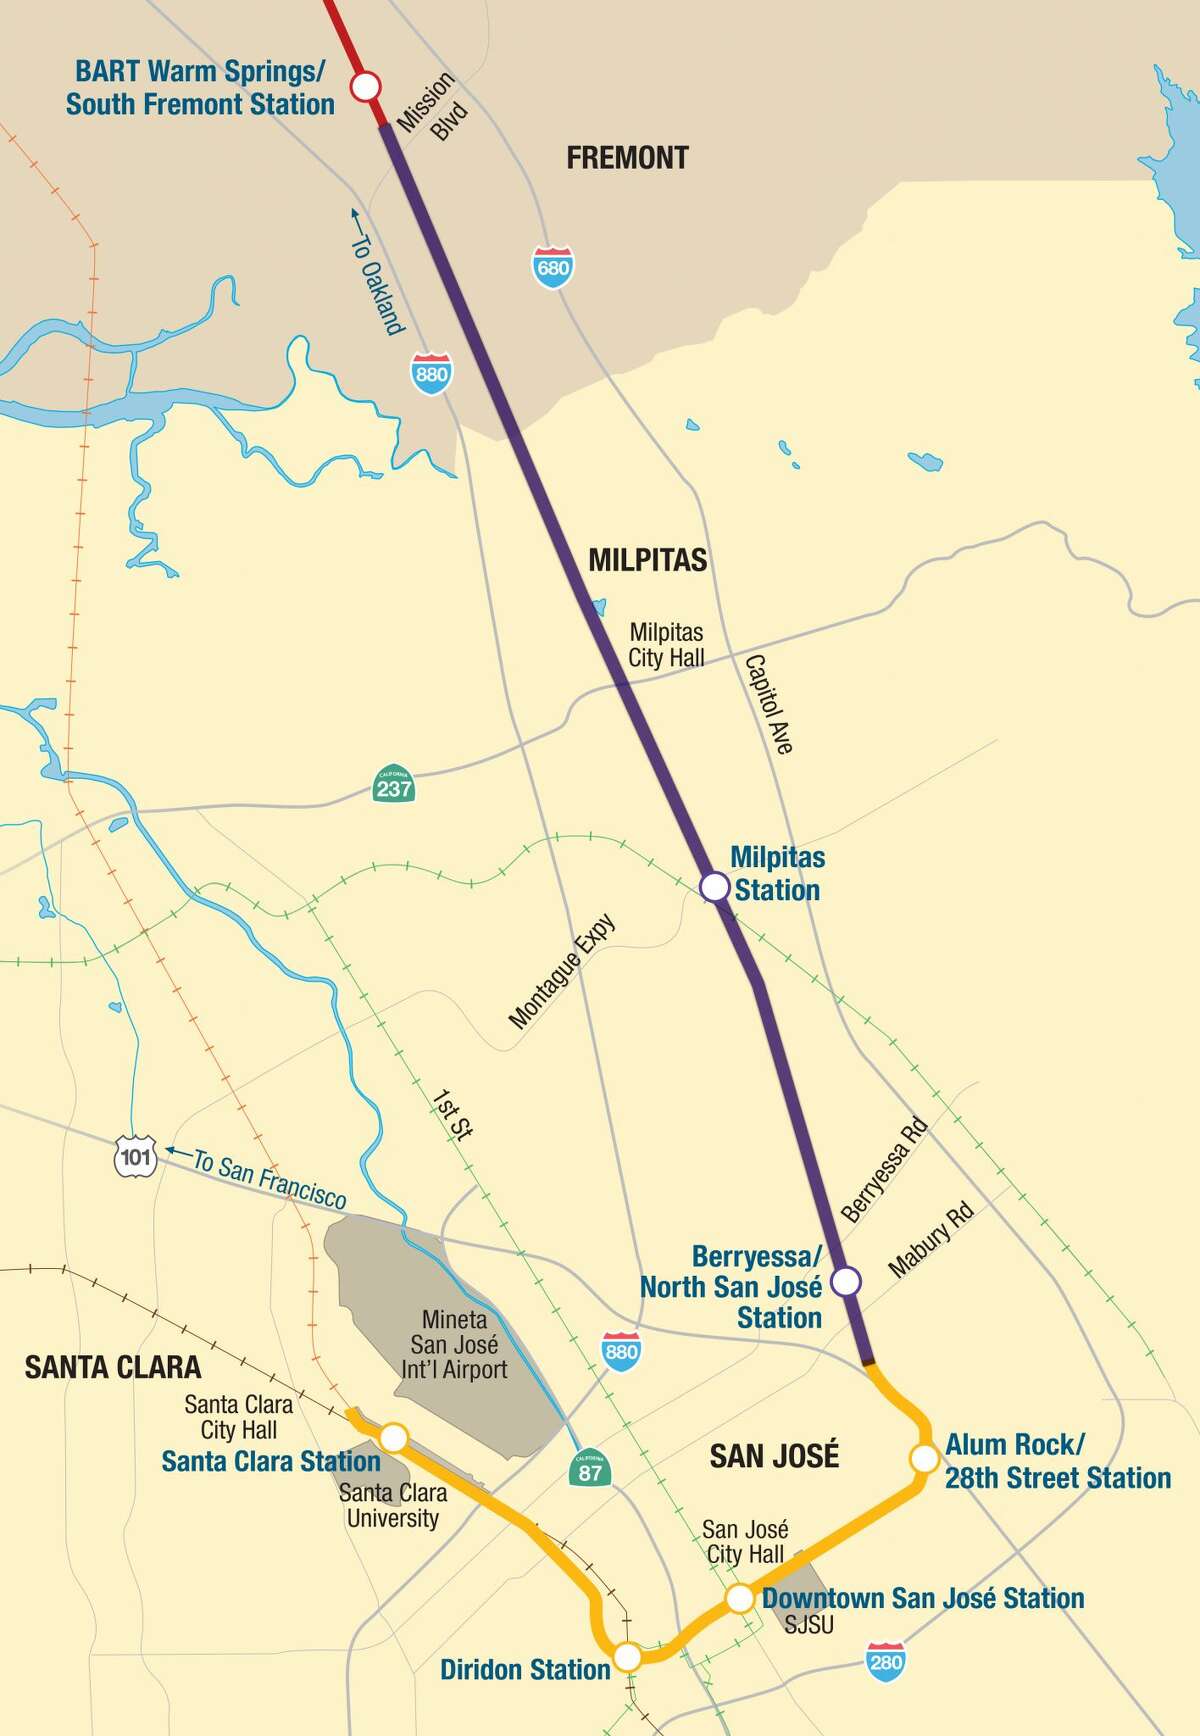 Phase I and II of BART and VTA's extension project into the South Bay are seen in this map. The new Milpitas and Berryessa stations were slated to open in late 2019, but now VTA is saying plans are to open them some time in 2020. A projected date has not yet been given. The second phase, outlined in yellow, is also shown.